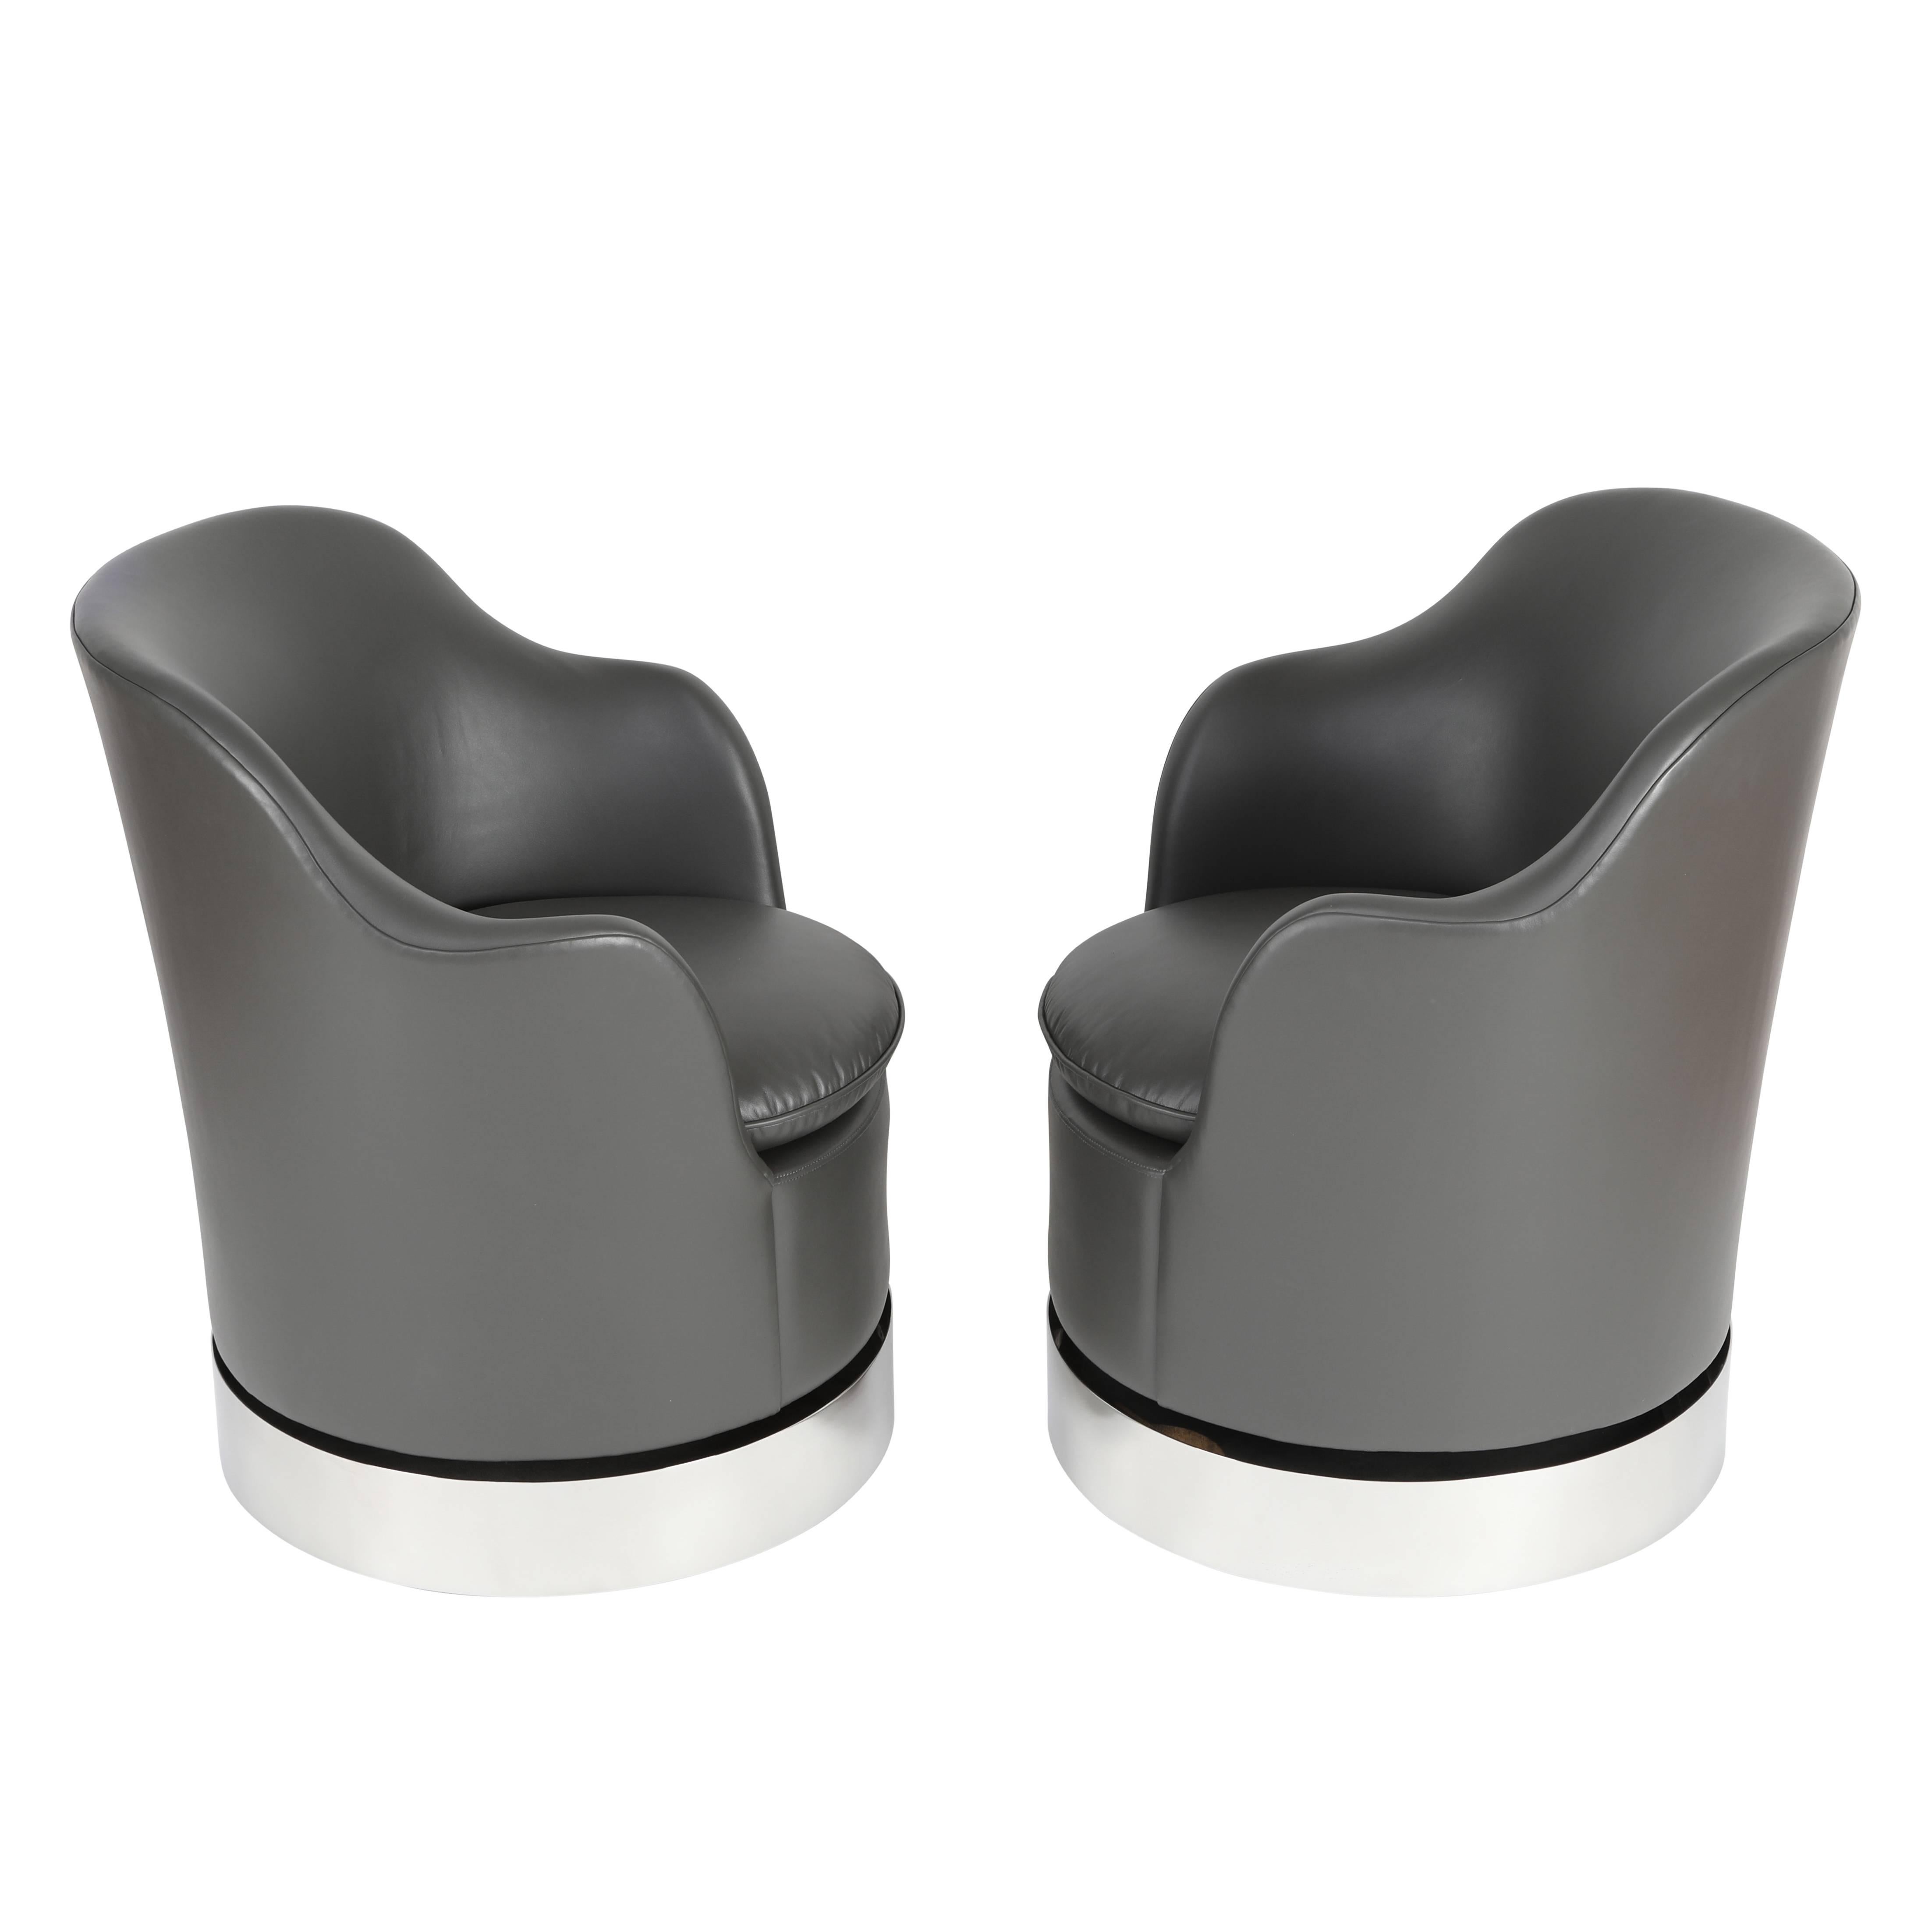 This beautifully crafted pair of tilt and swivel chairs features a circular-form body with curved backrest sloping down to integrated arms. Each chair features a single, reversible seat cushion. The conforming base is a seamless piece of highly